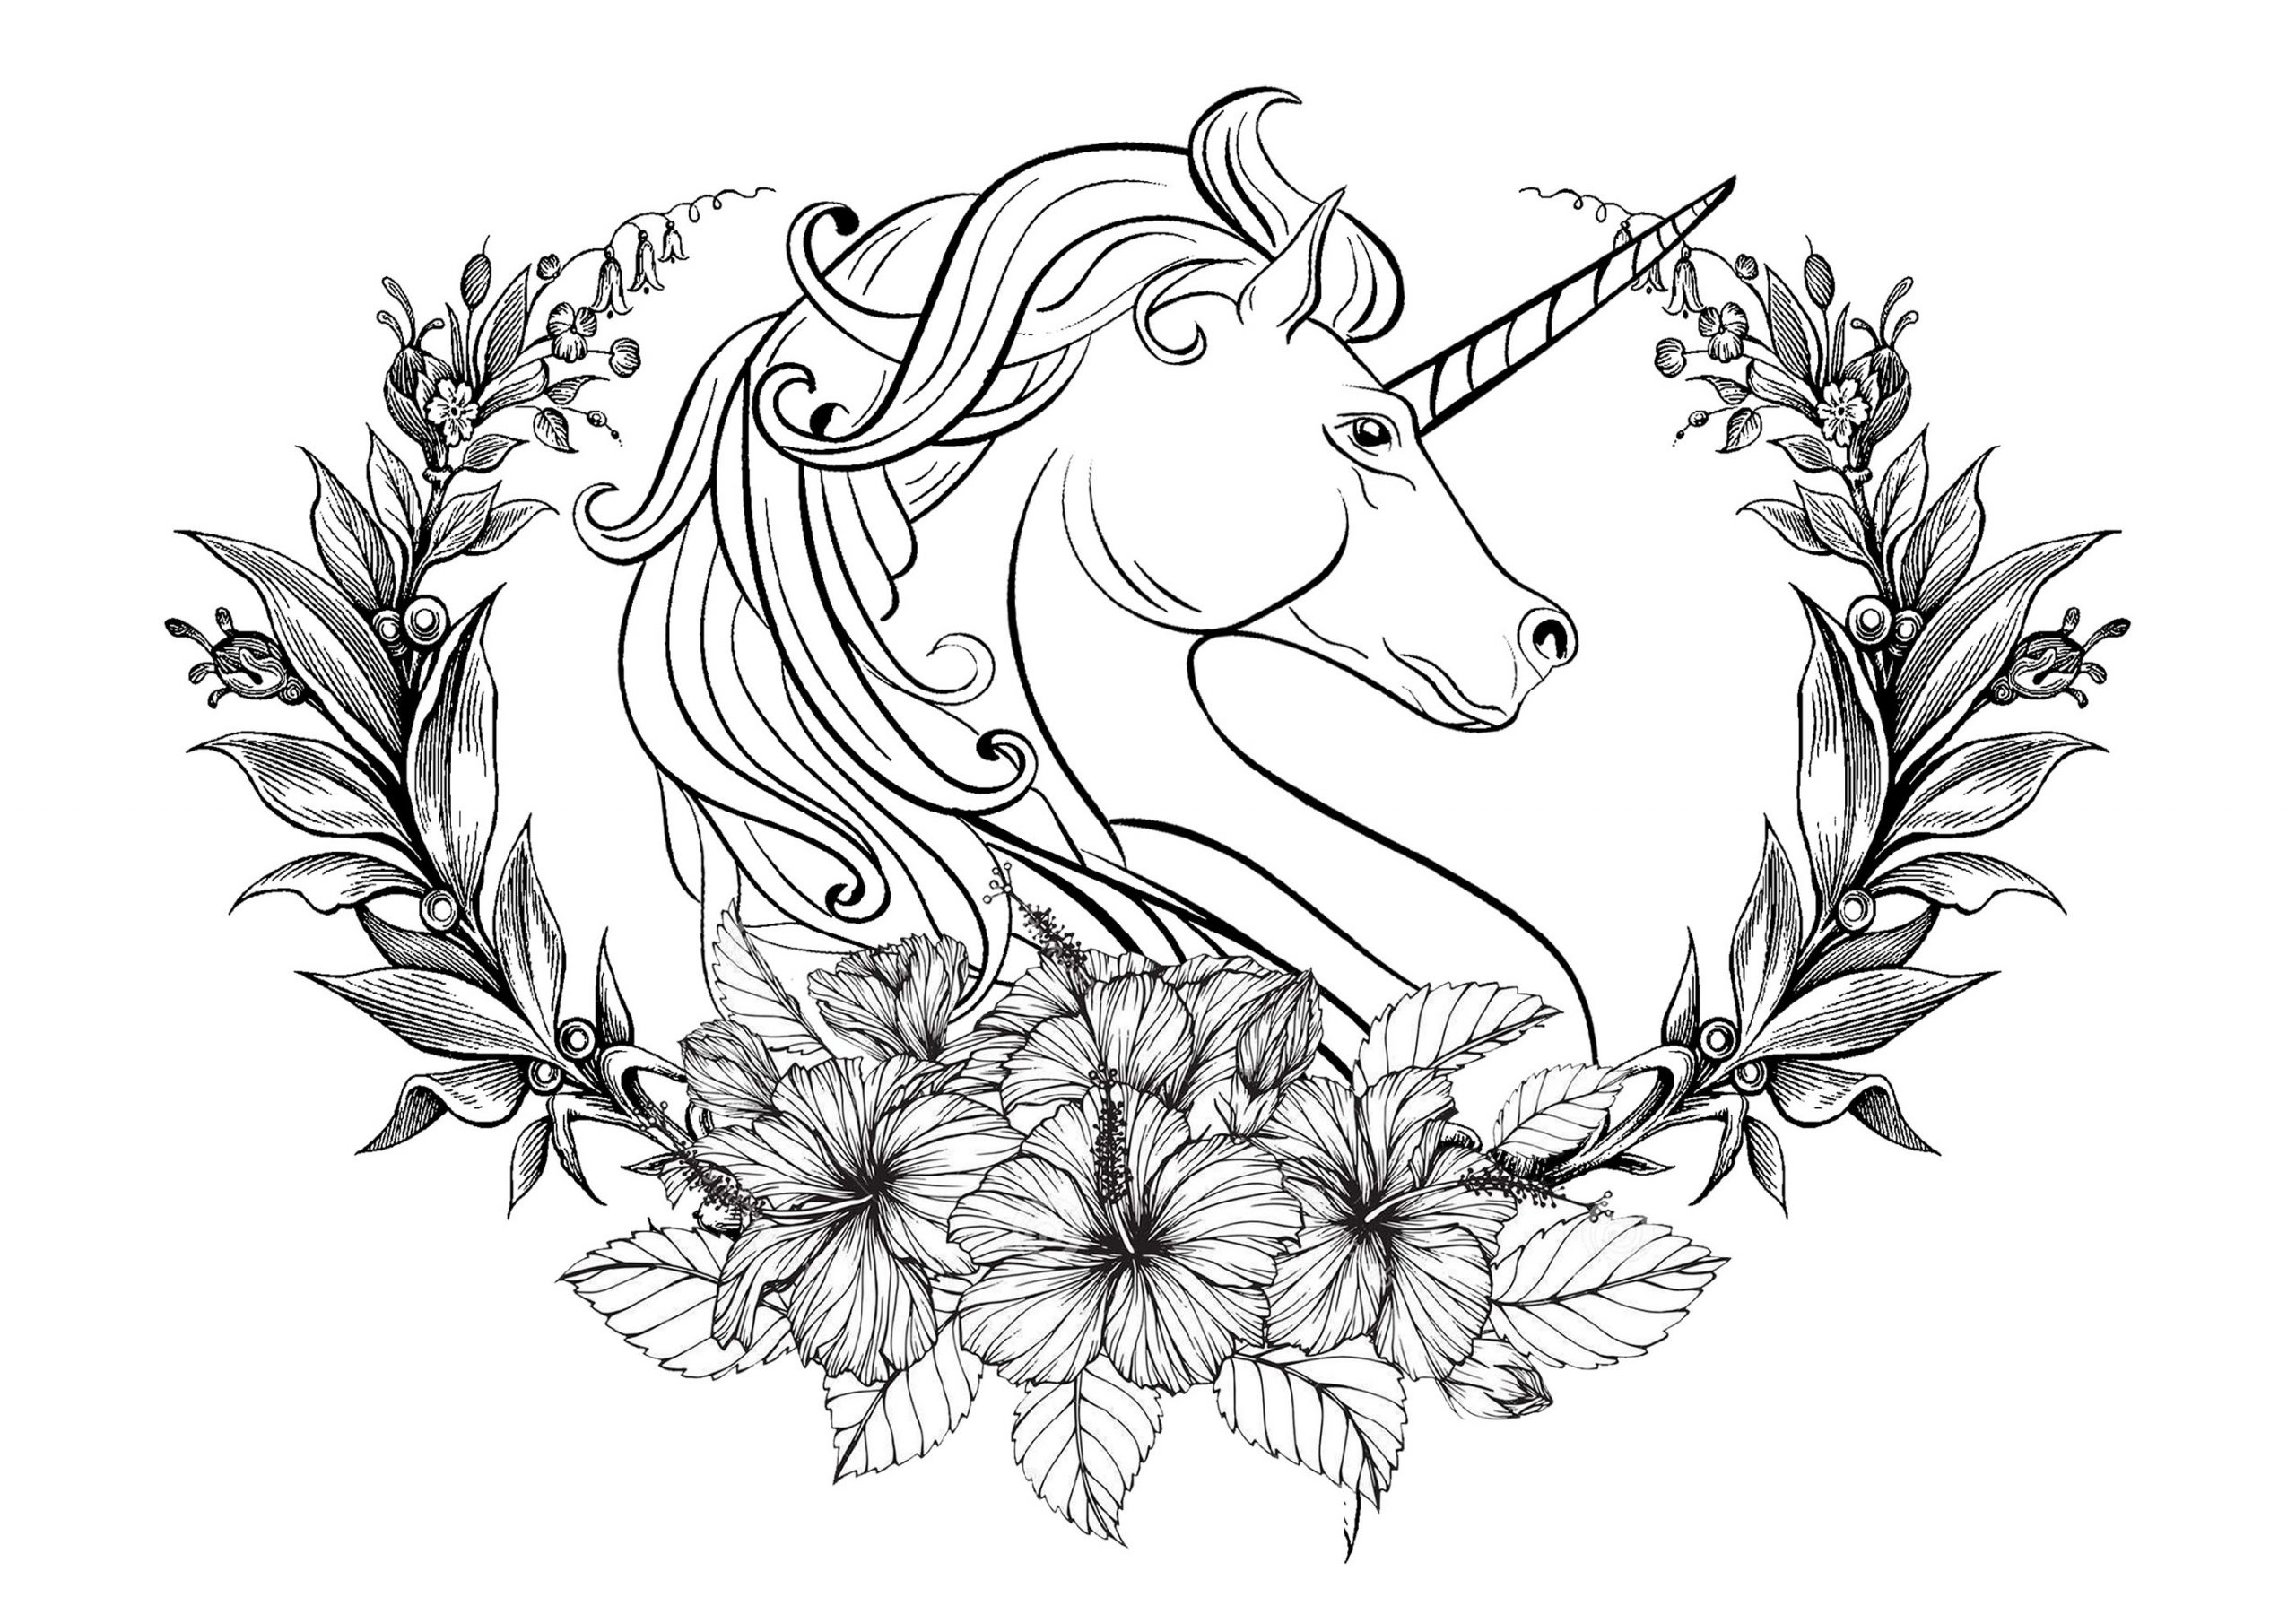 Advanced Unicorn Coloring Pages | 101 Coloring